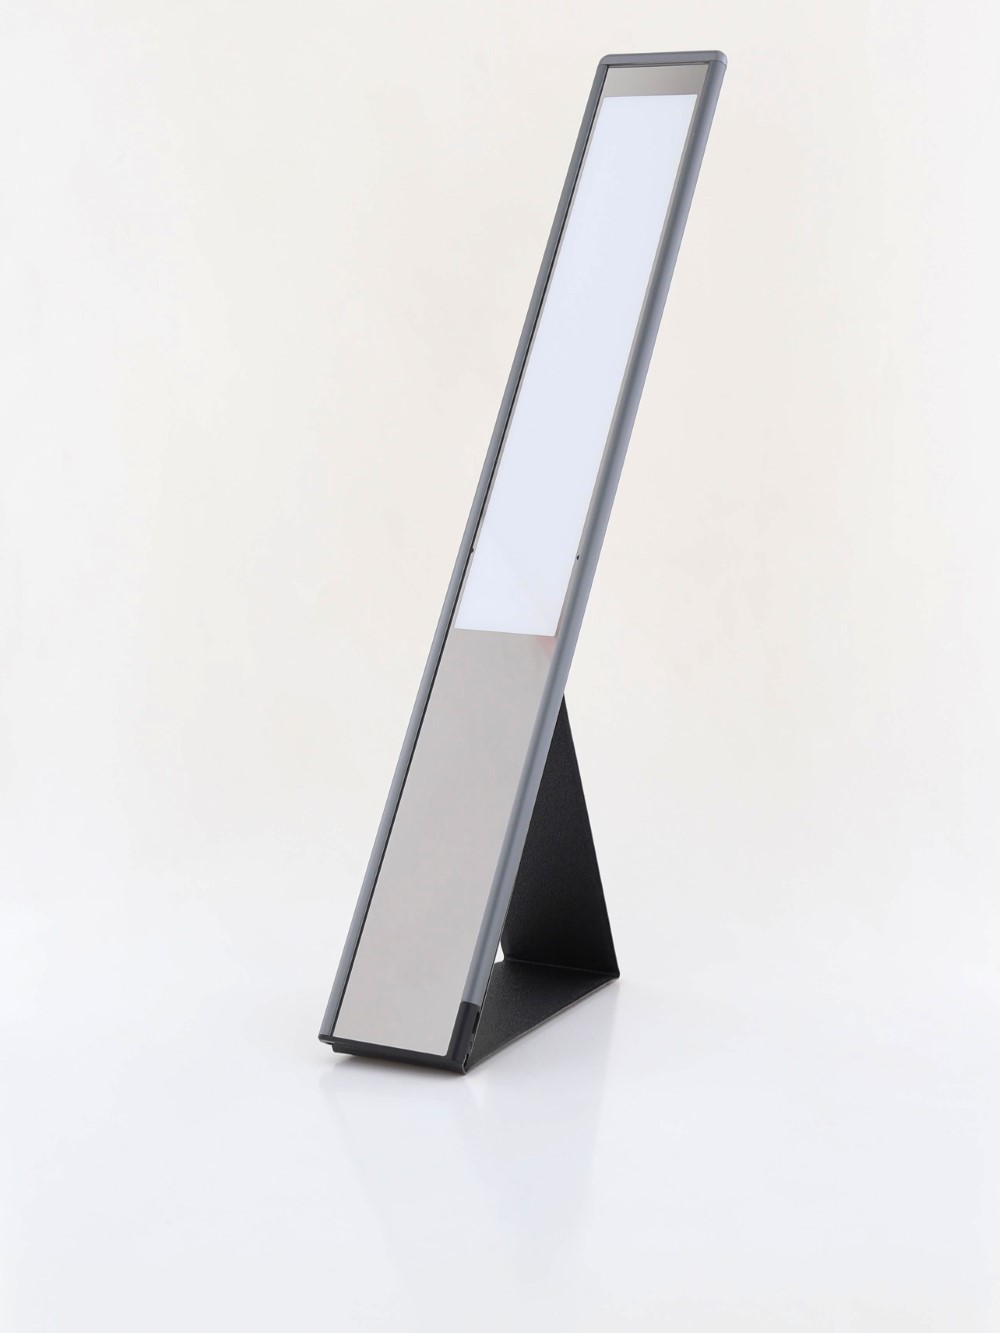 The Luxe Lamp V2 Space Gray